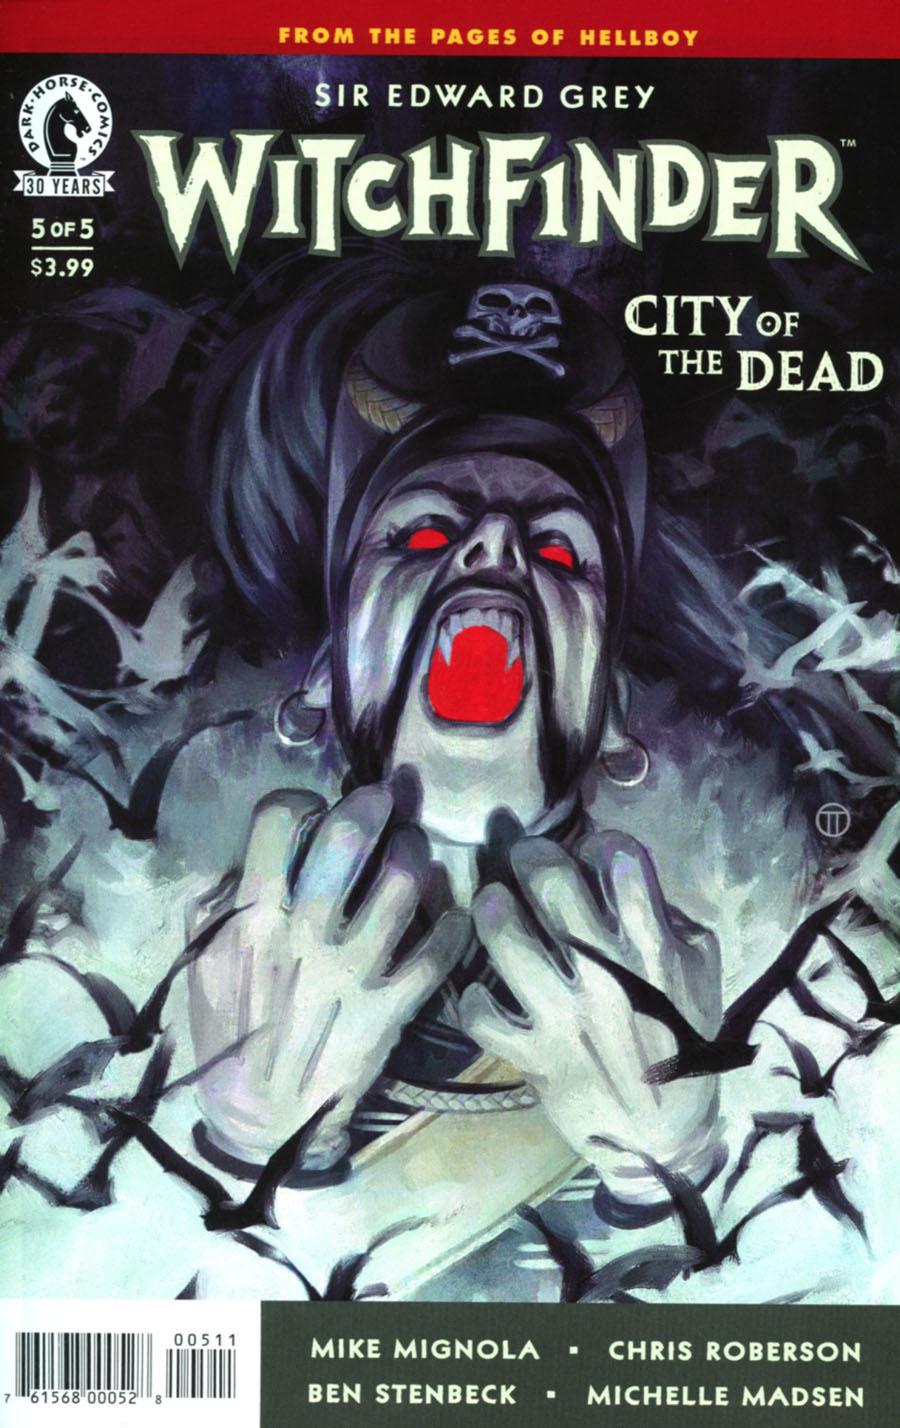 Witchfinder City Of The Dead Vol. 1 #5